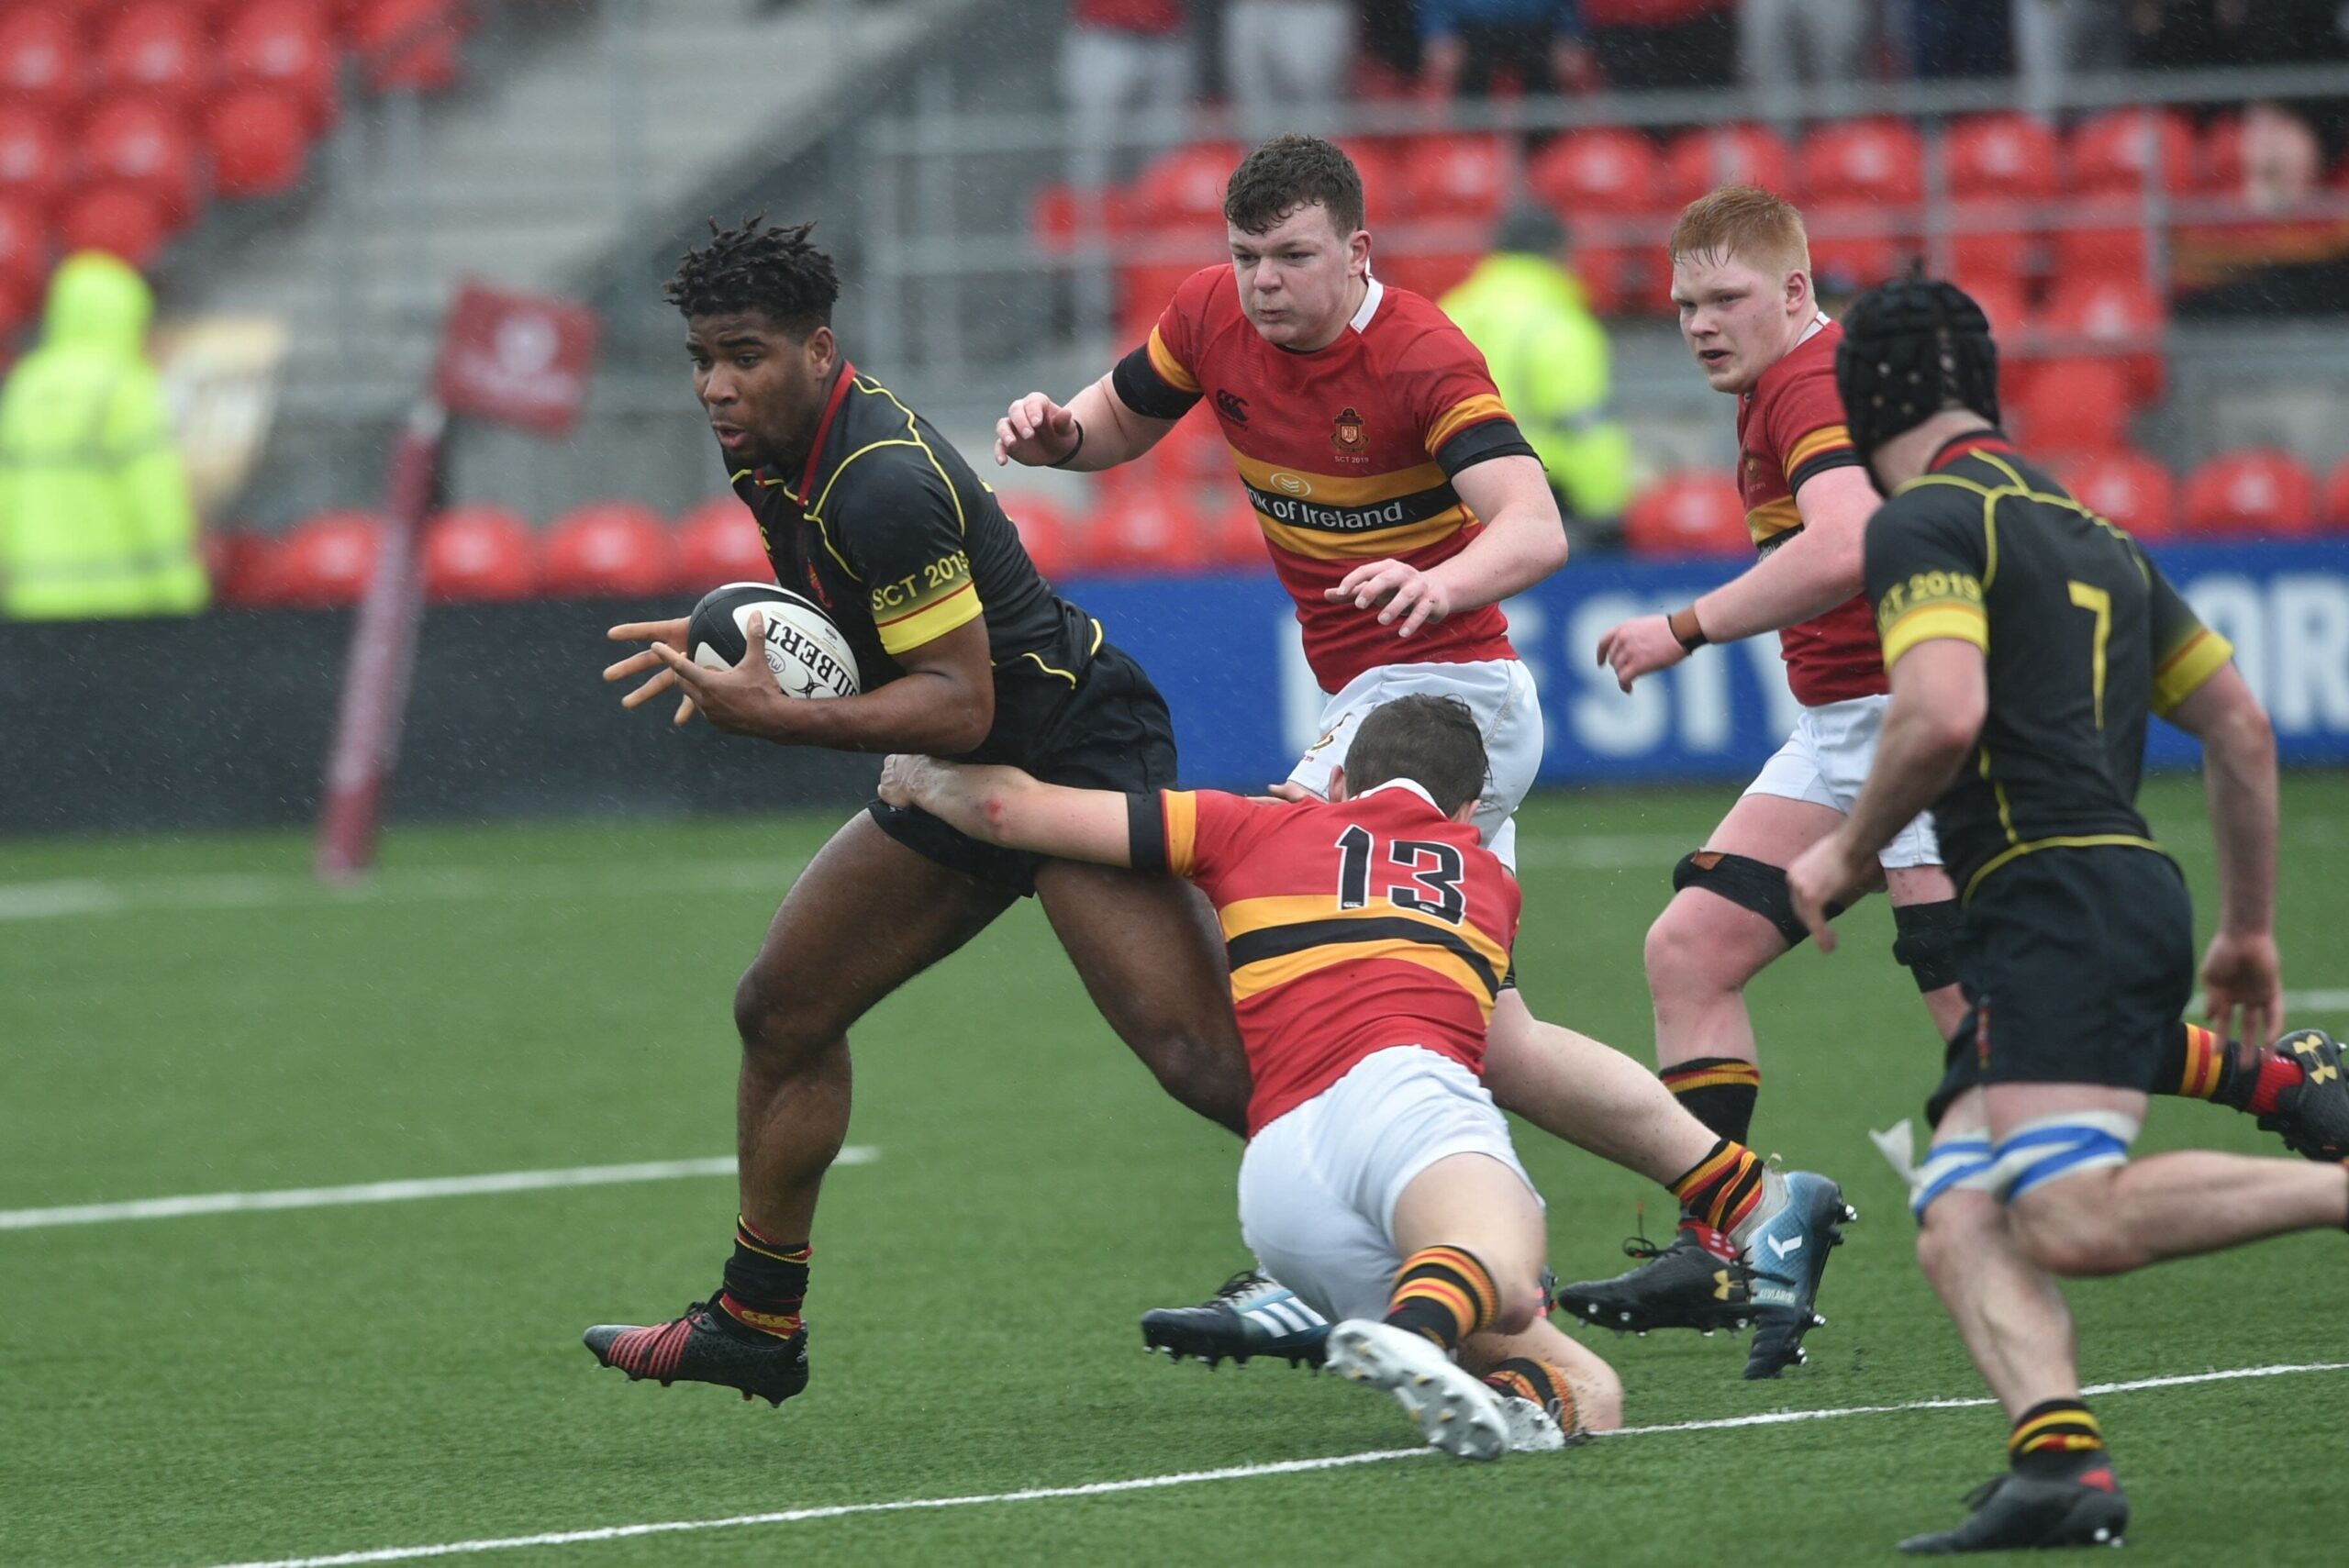 Daniel Okeke plays for Shannon RFC and hopes to one day play for Munster and Ireland at a pro-level